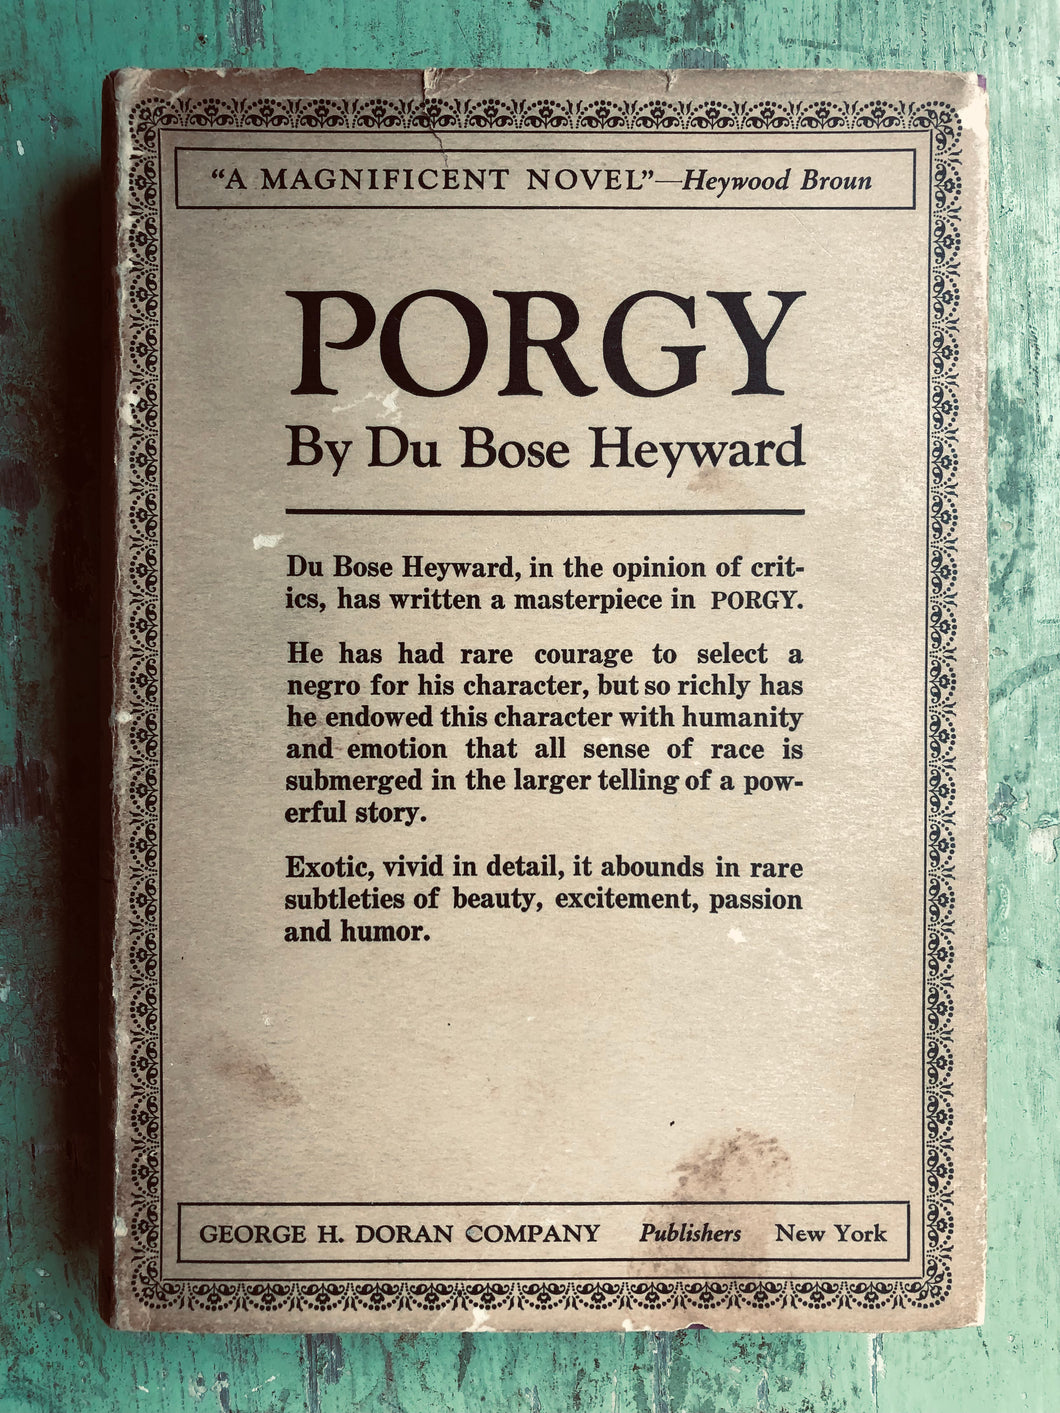 Porgy by Du Bose Hayward. Decorated by Theodore Nadejen